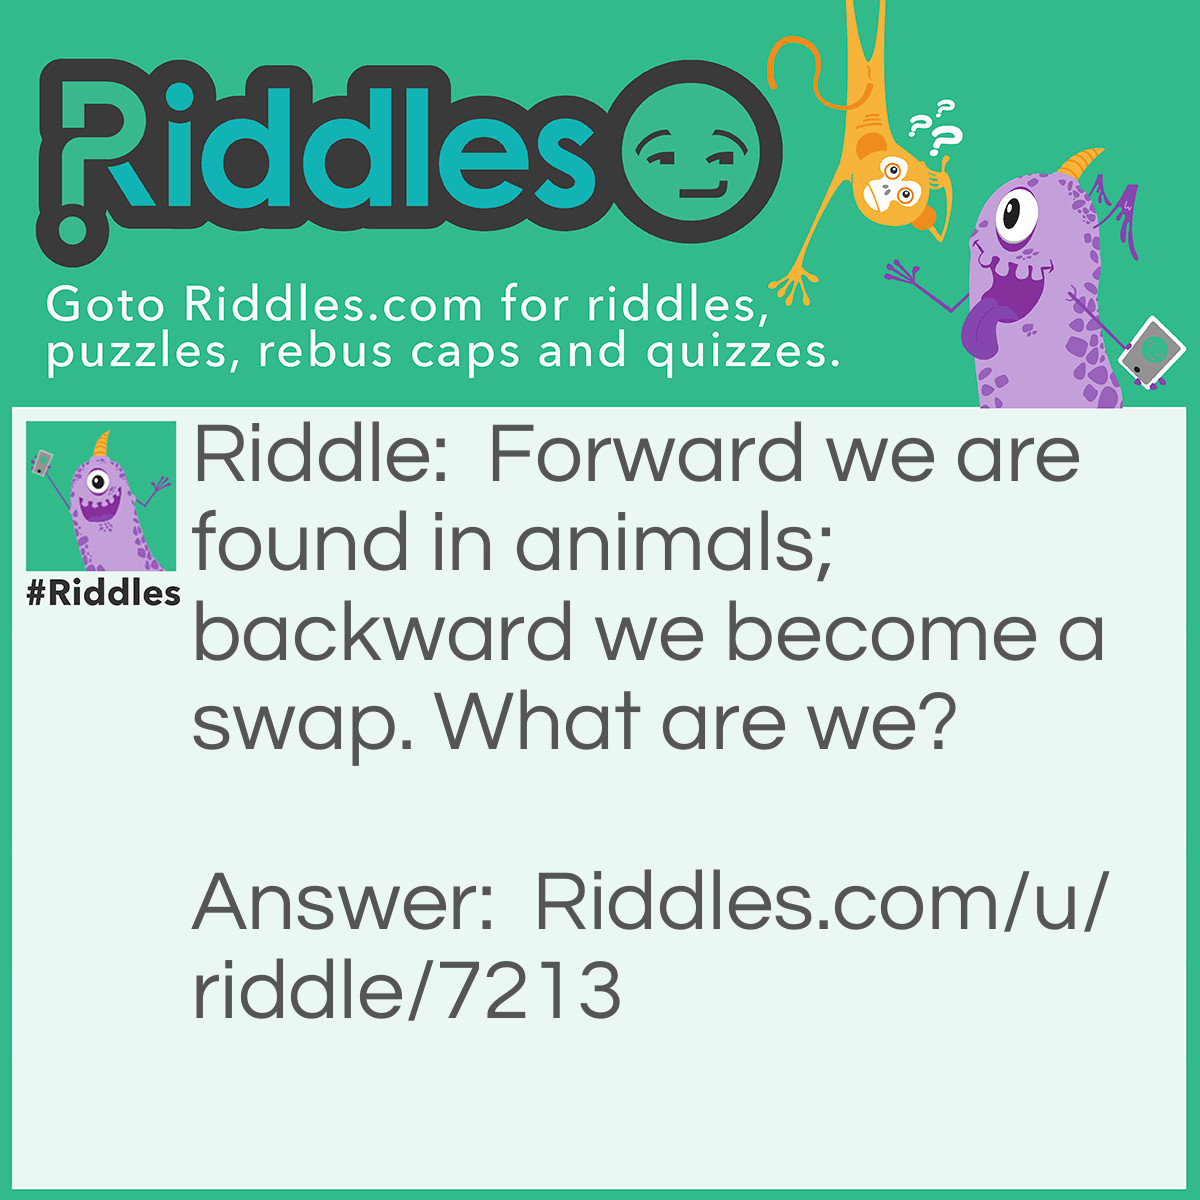 Riddle: Forward we are found in animals; backward we become a swap. What are we? Answer: We are PAWS.